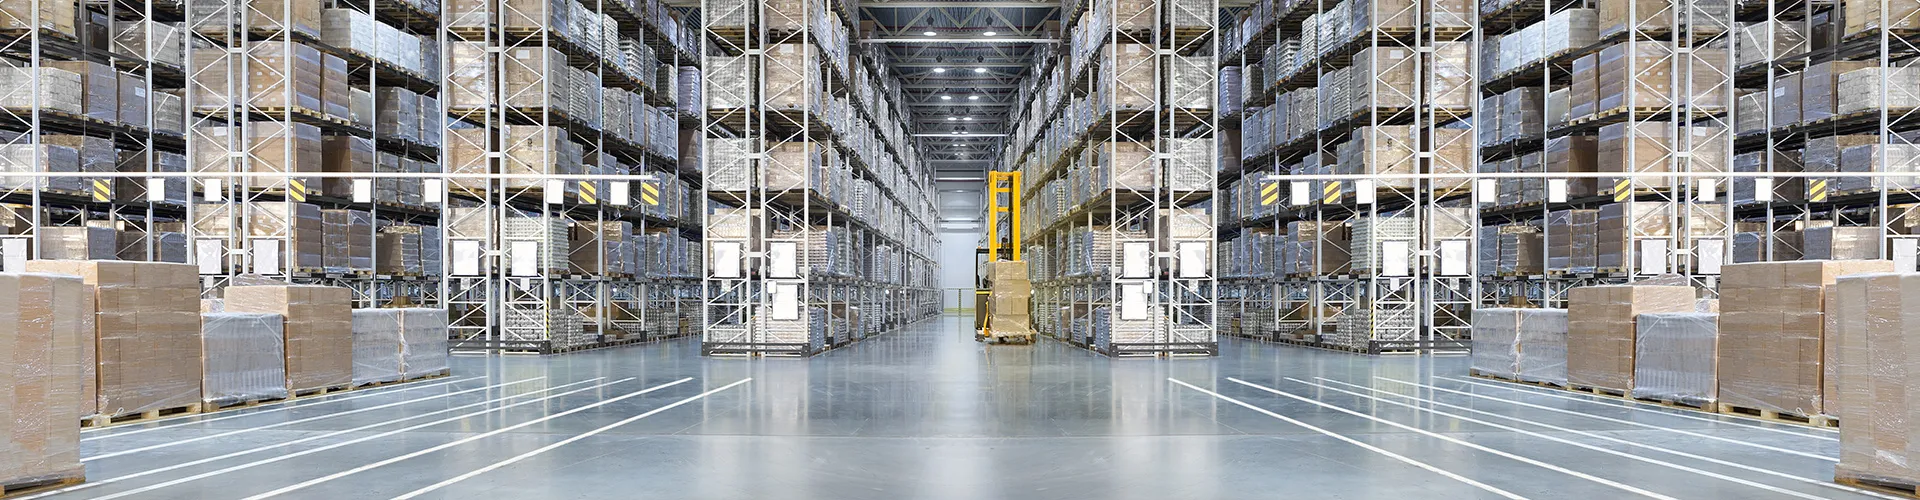 The software helps businesses control the amount of inventory